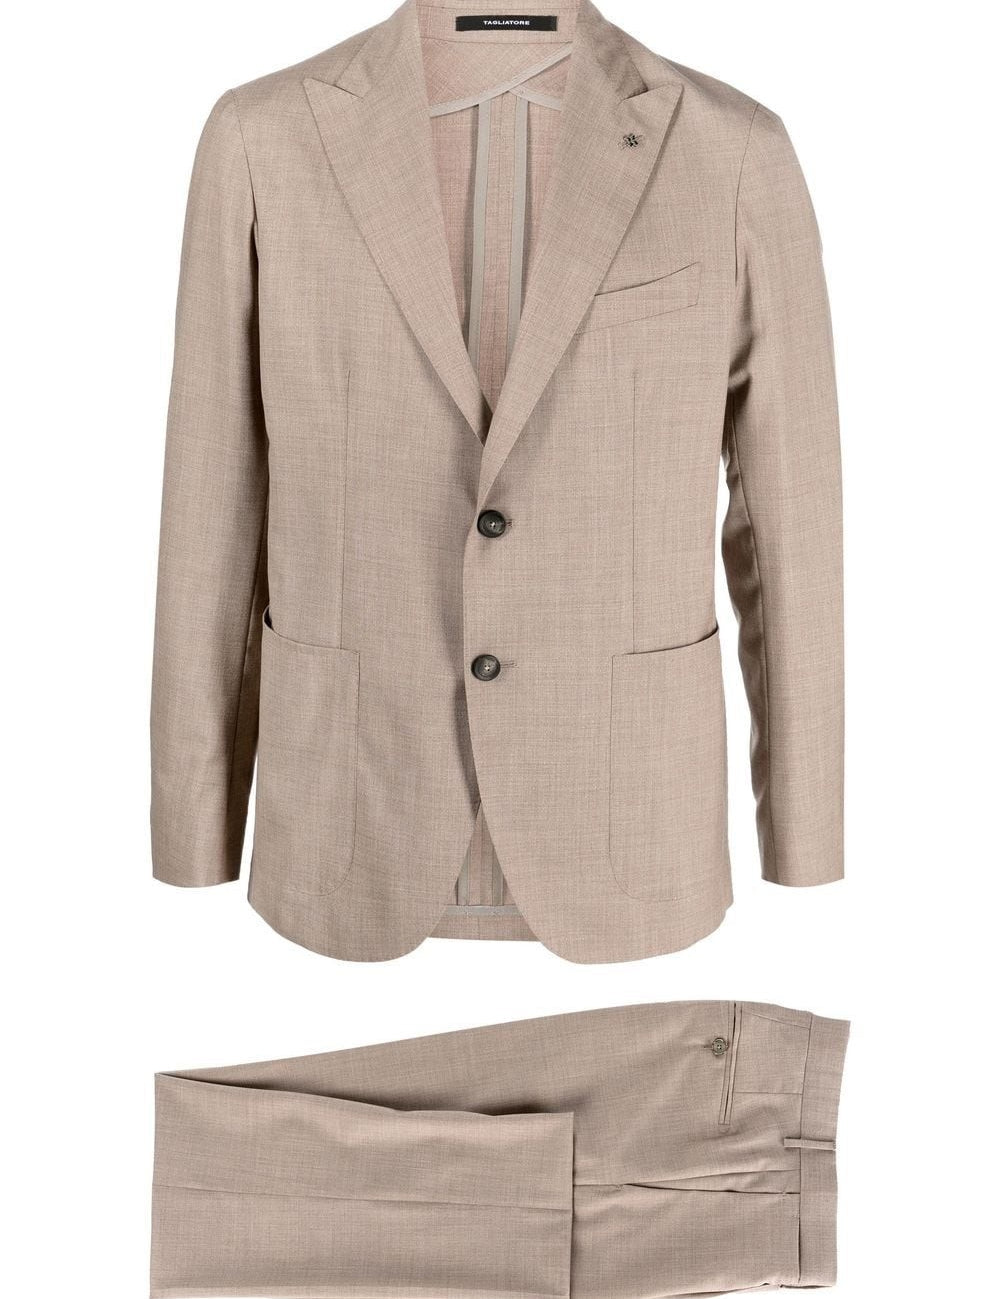 silk-and-cotton-formal-suit.jpg